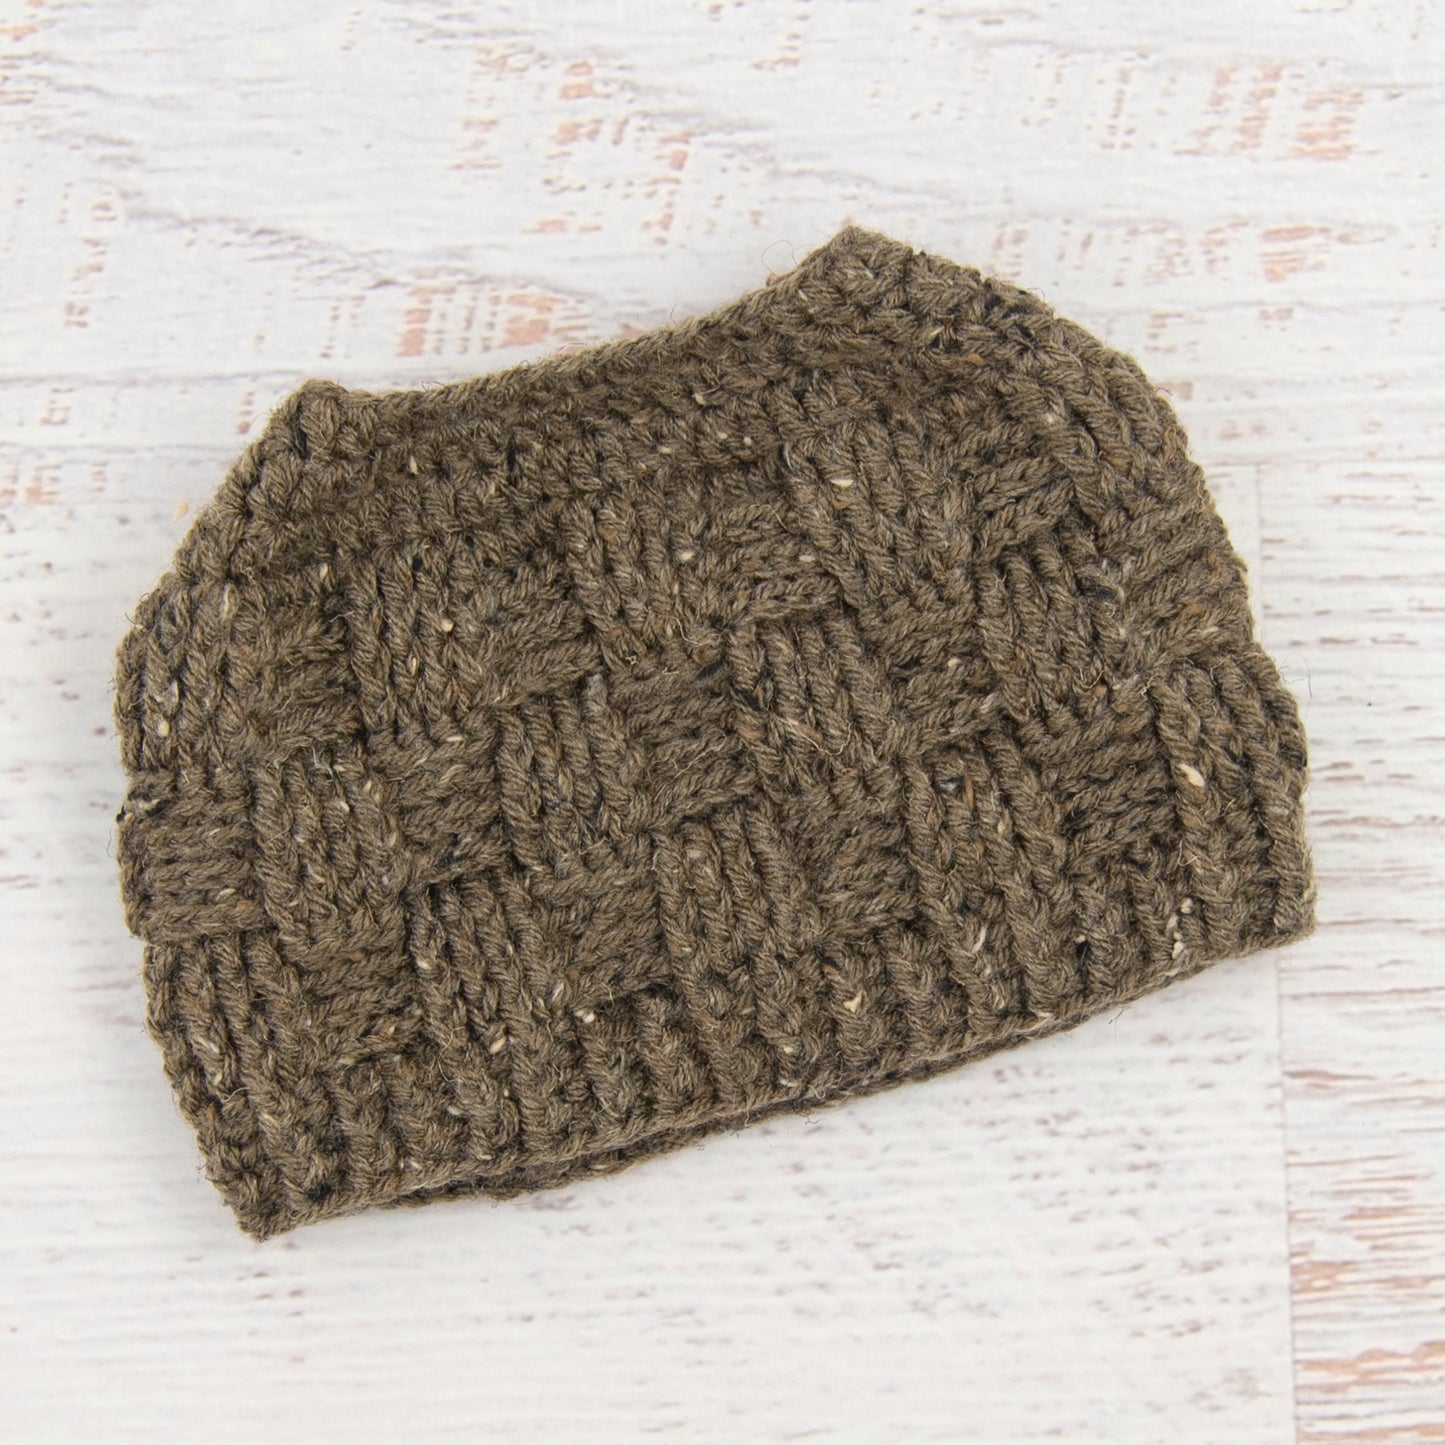 In-Stock 3-10 Year The 'Everyday' Messy Bun Hat in Barley